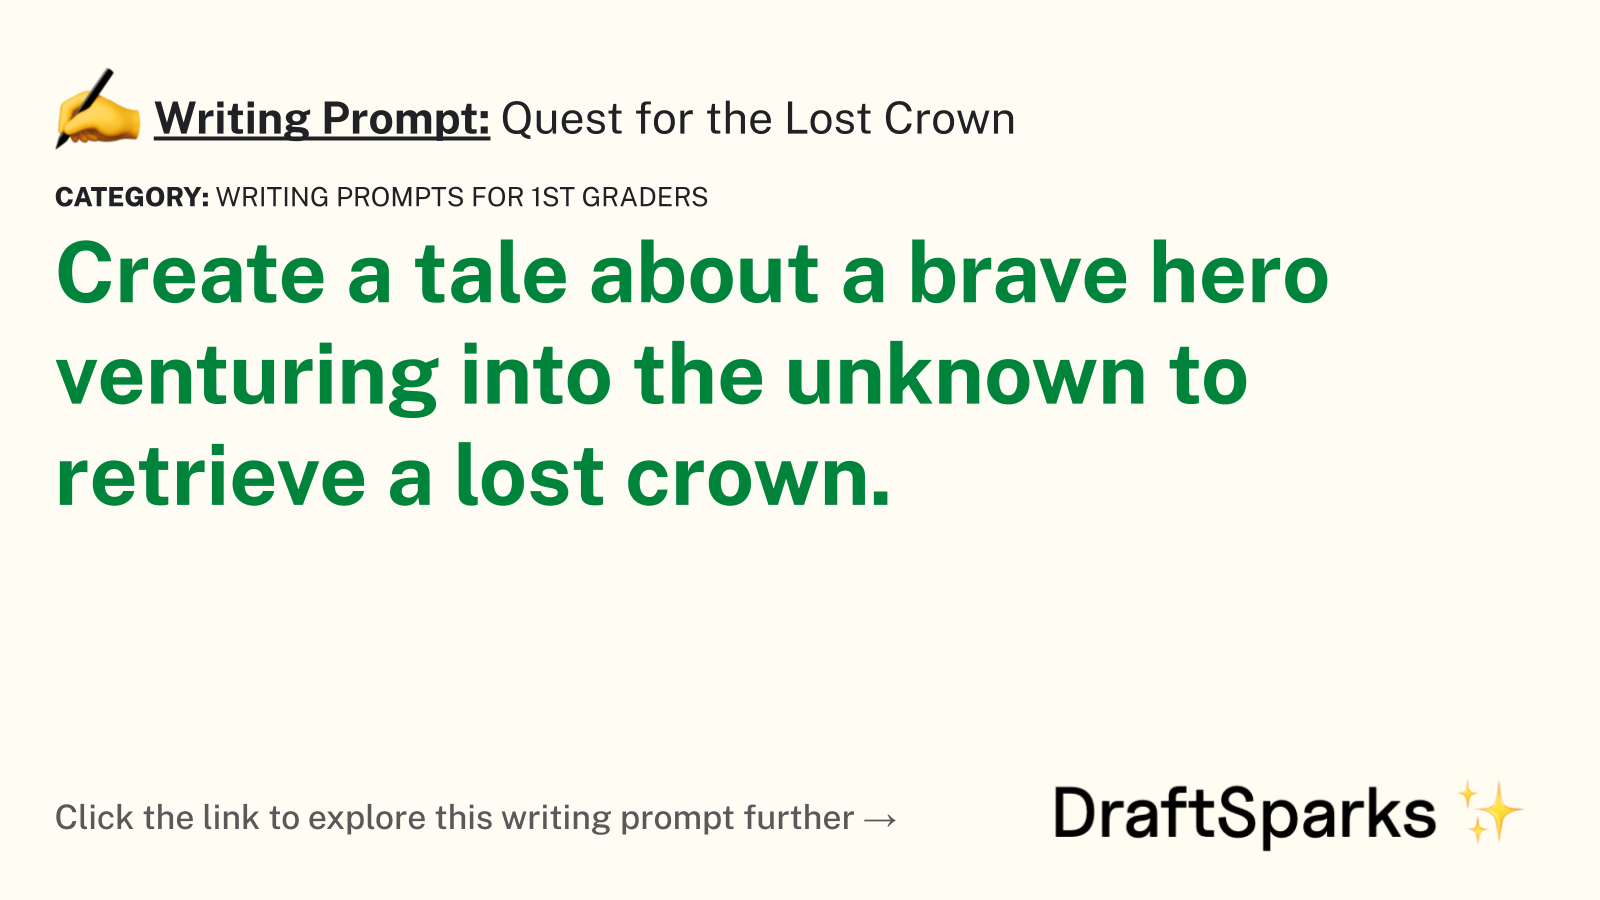 Quest for the Lost Crown